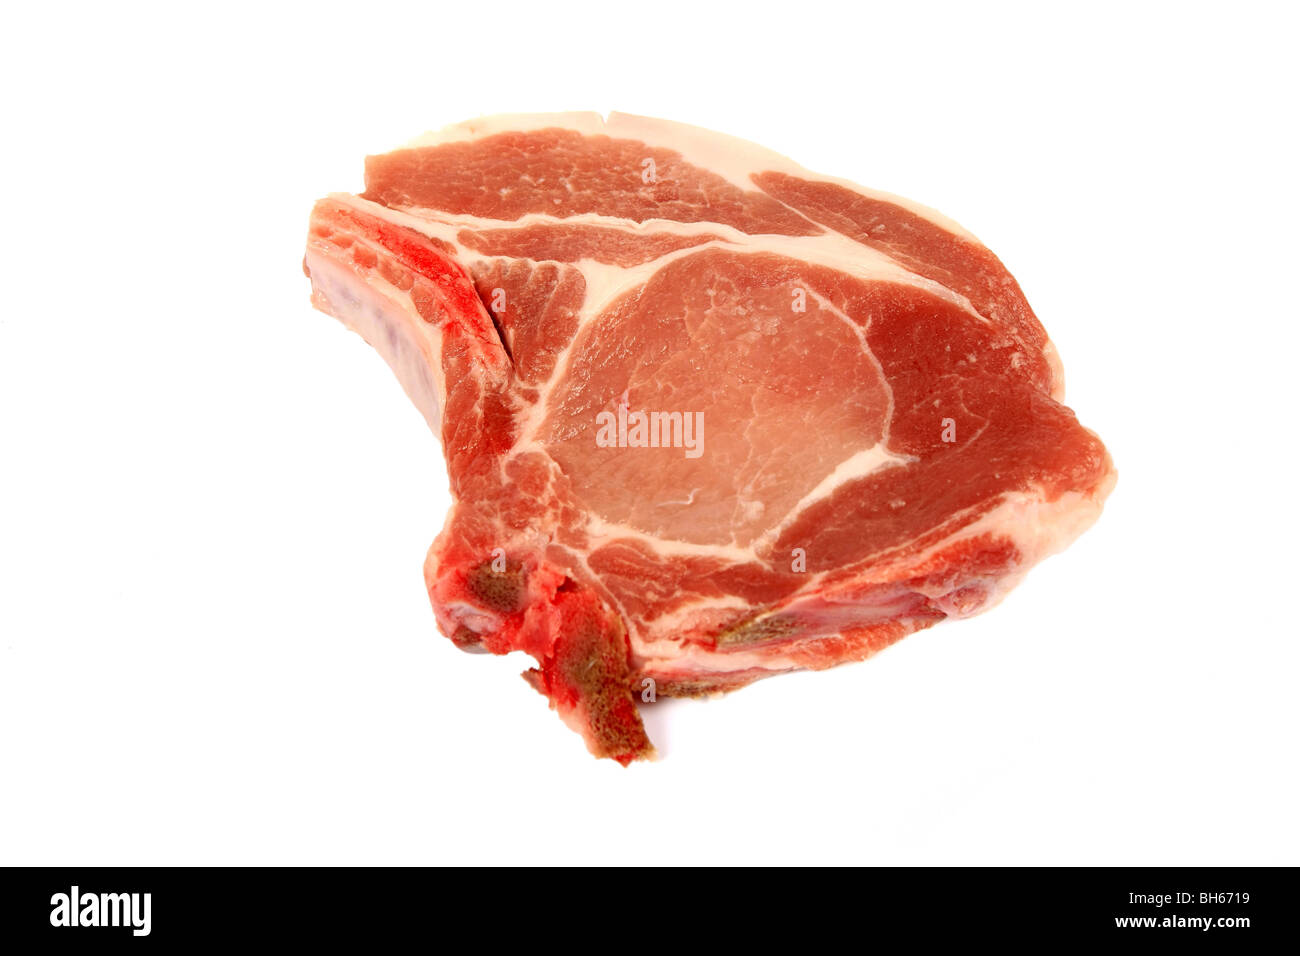 One Pork Loin chop against a white background Stock Photo